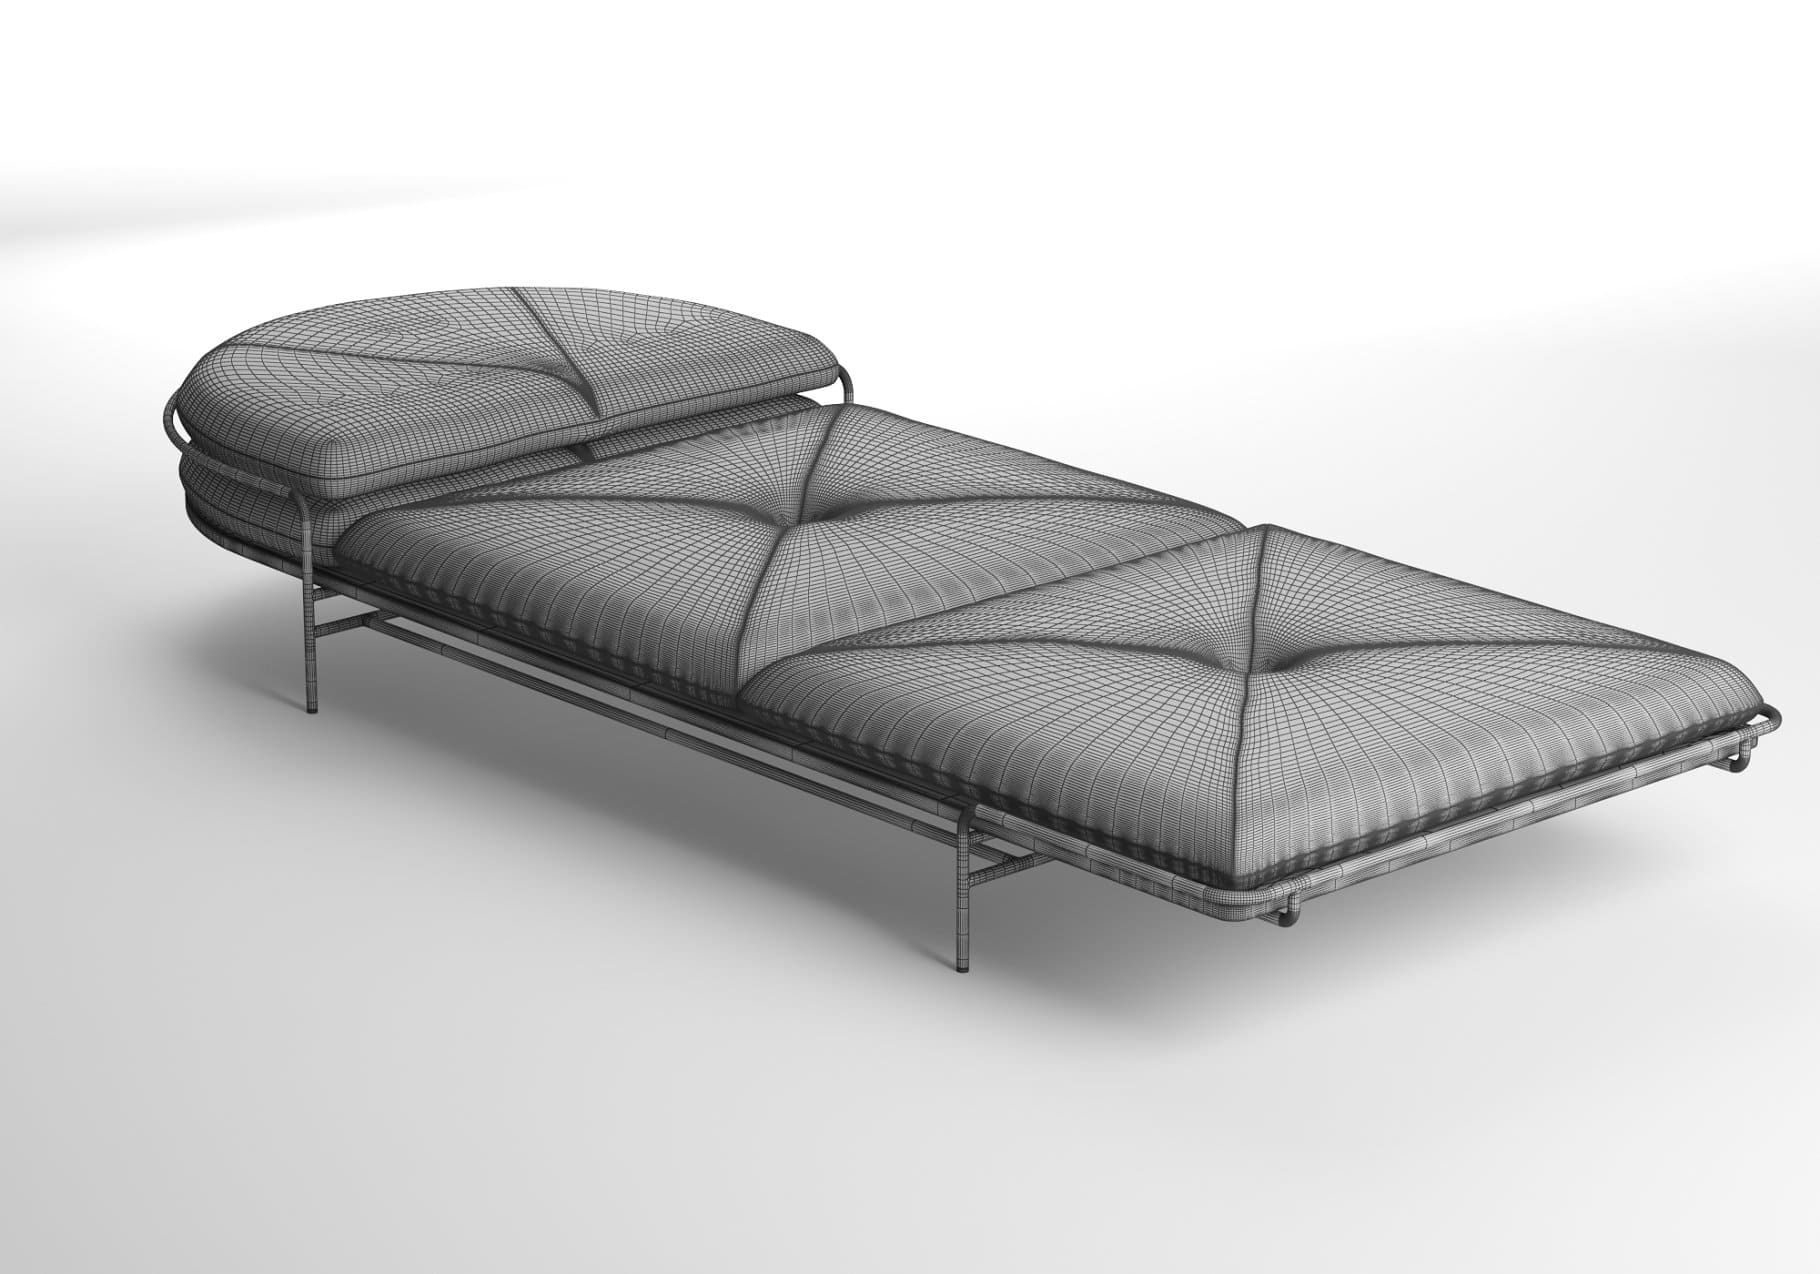 3D model Geometric Daybed by Bassam fellows.